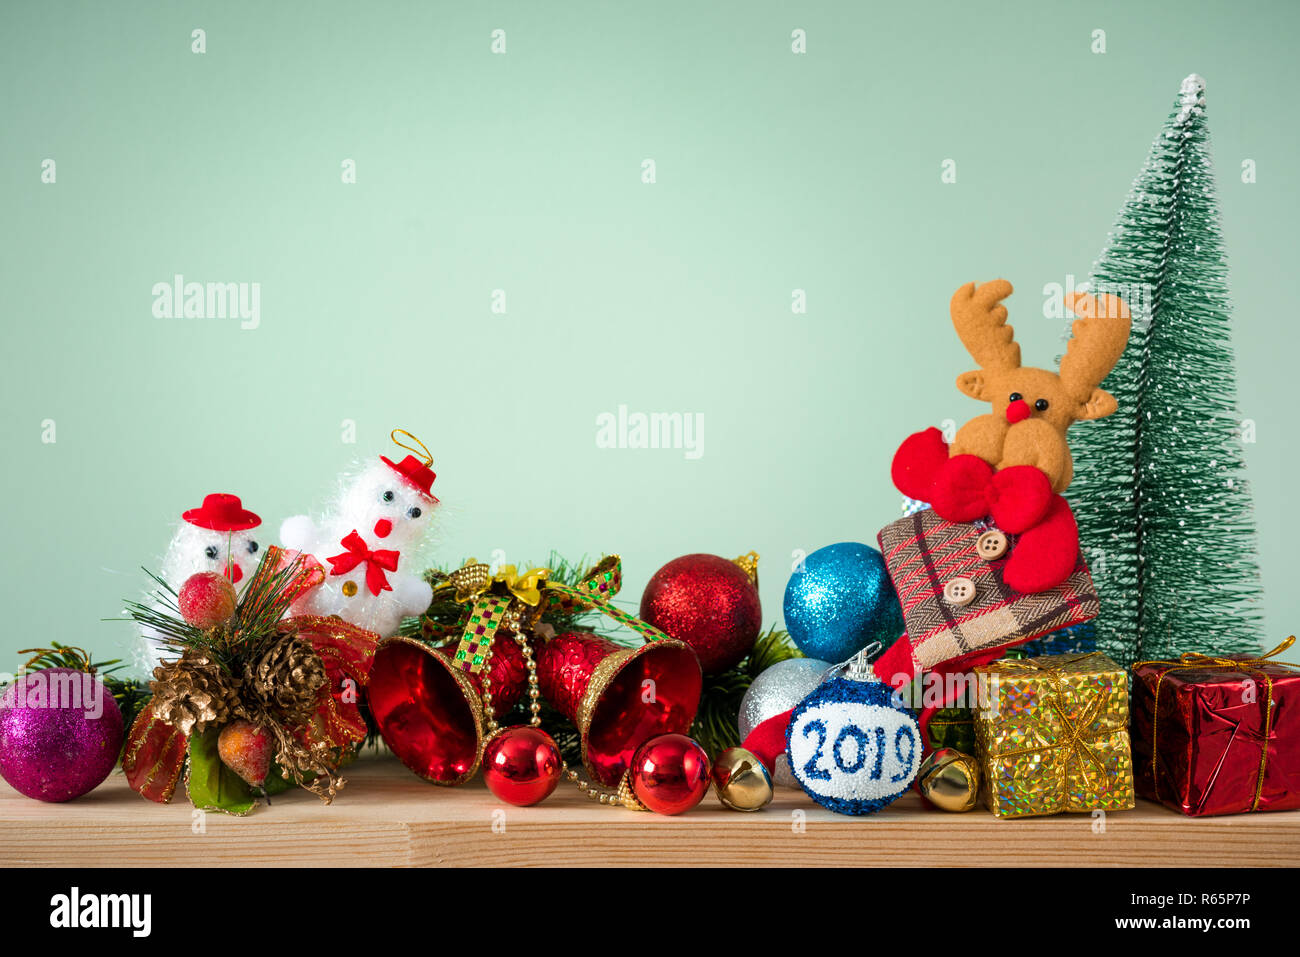 Christmas background. A small Christmas tree and boxes with gifts on a wooden table. Green background. Space for text. New Year's background. Stock Photo